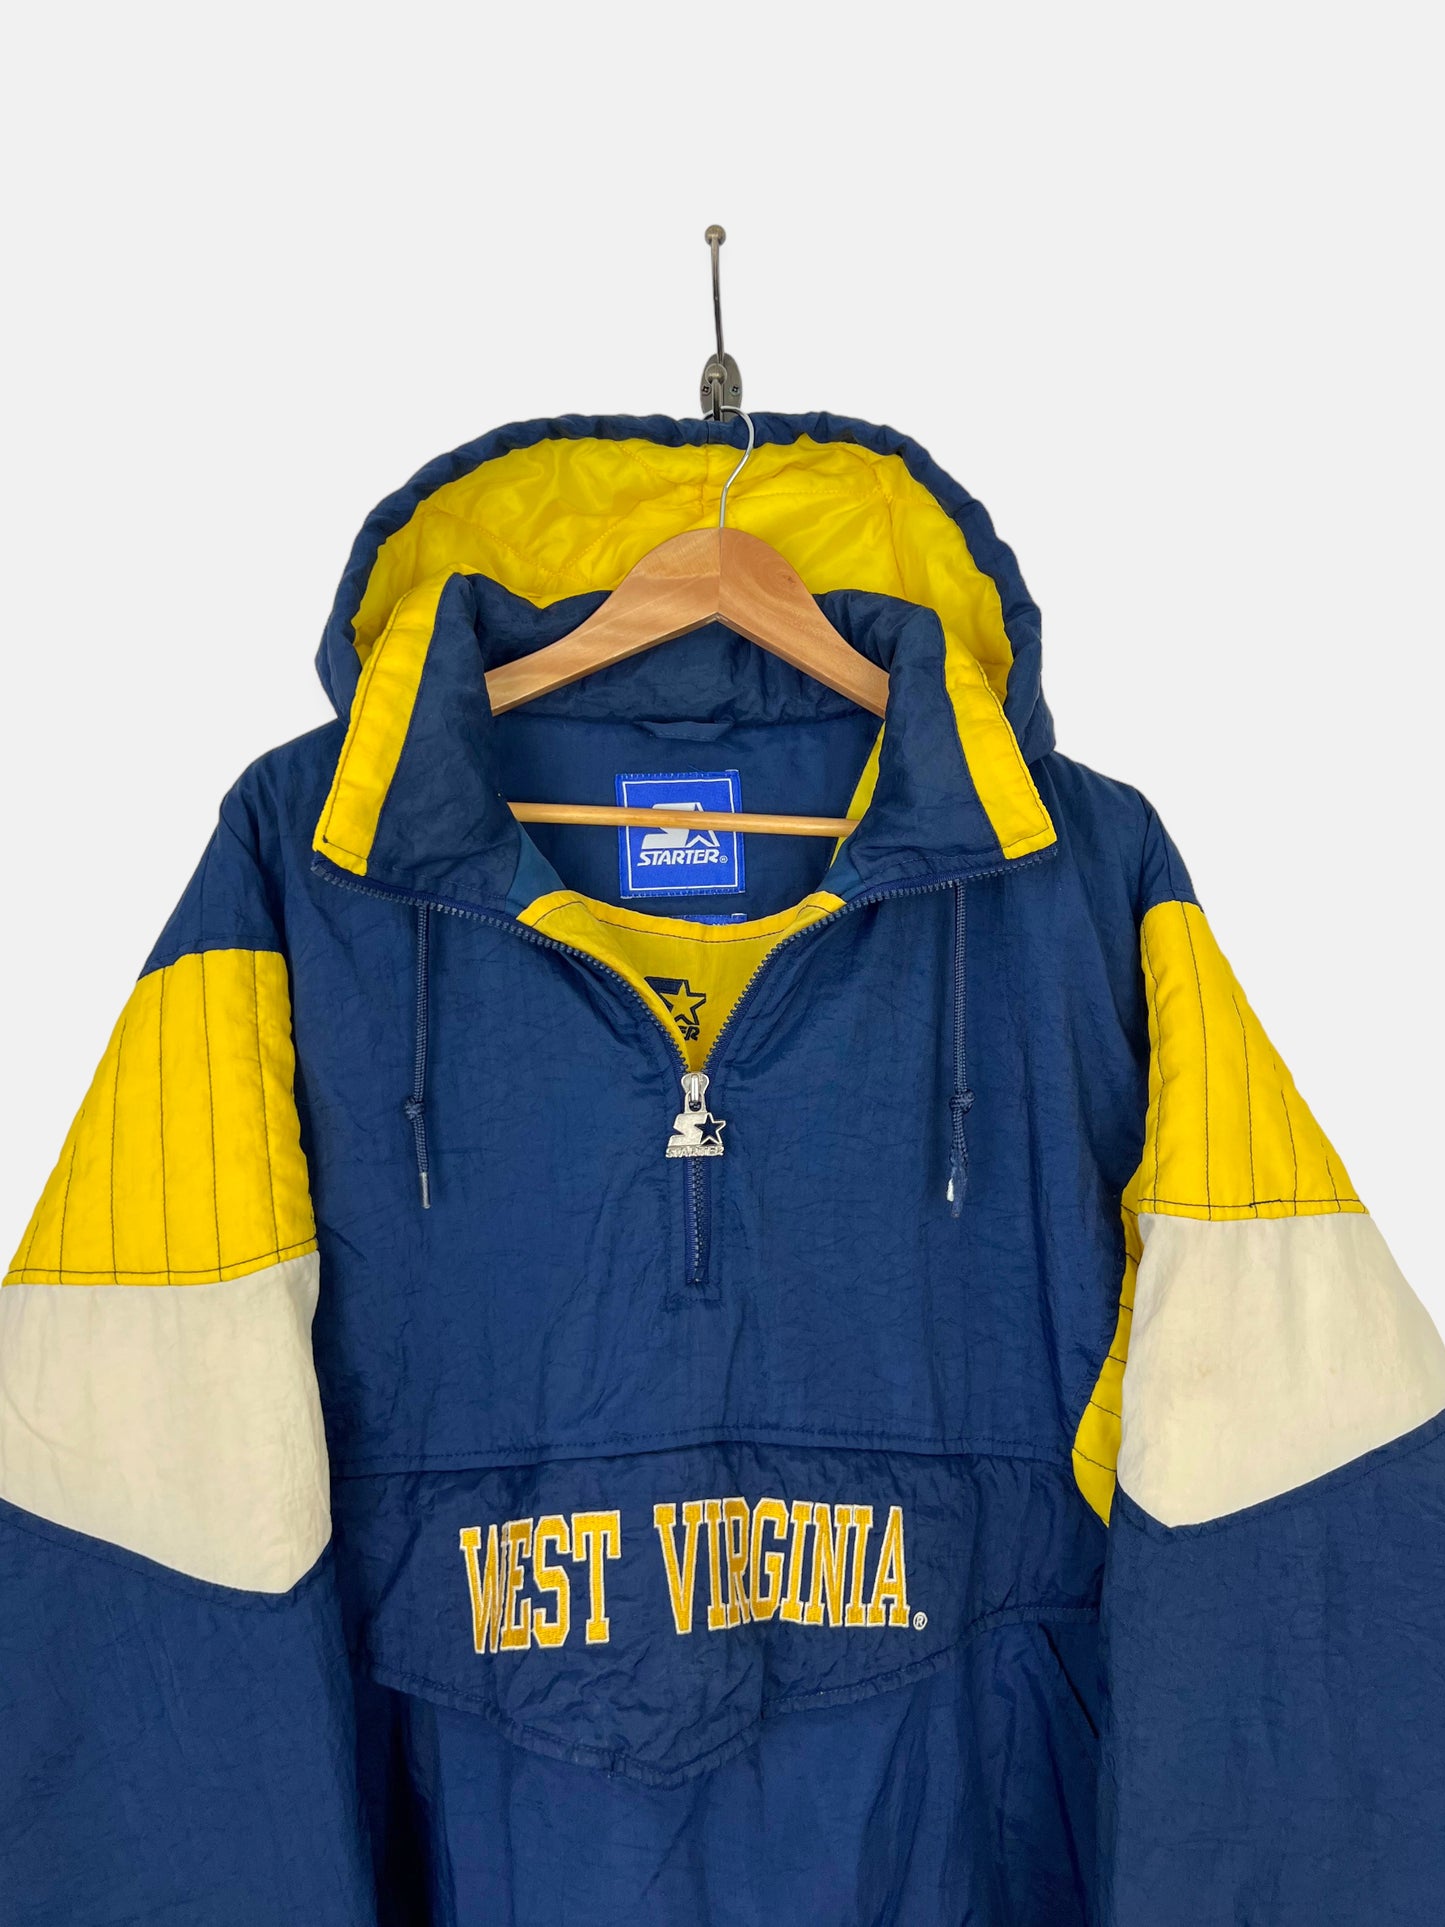 90's West Virginia Starter Embroidered Vintage Puffer Jacket with Hood Size XL-2XL